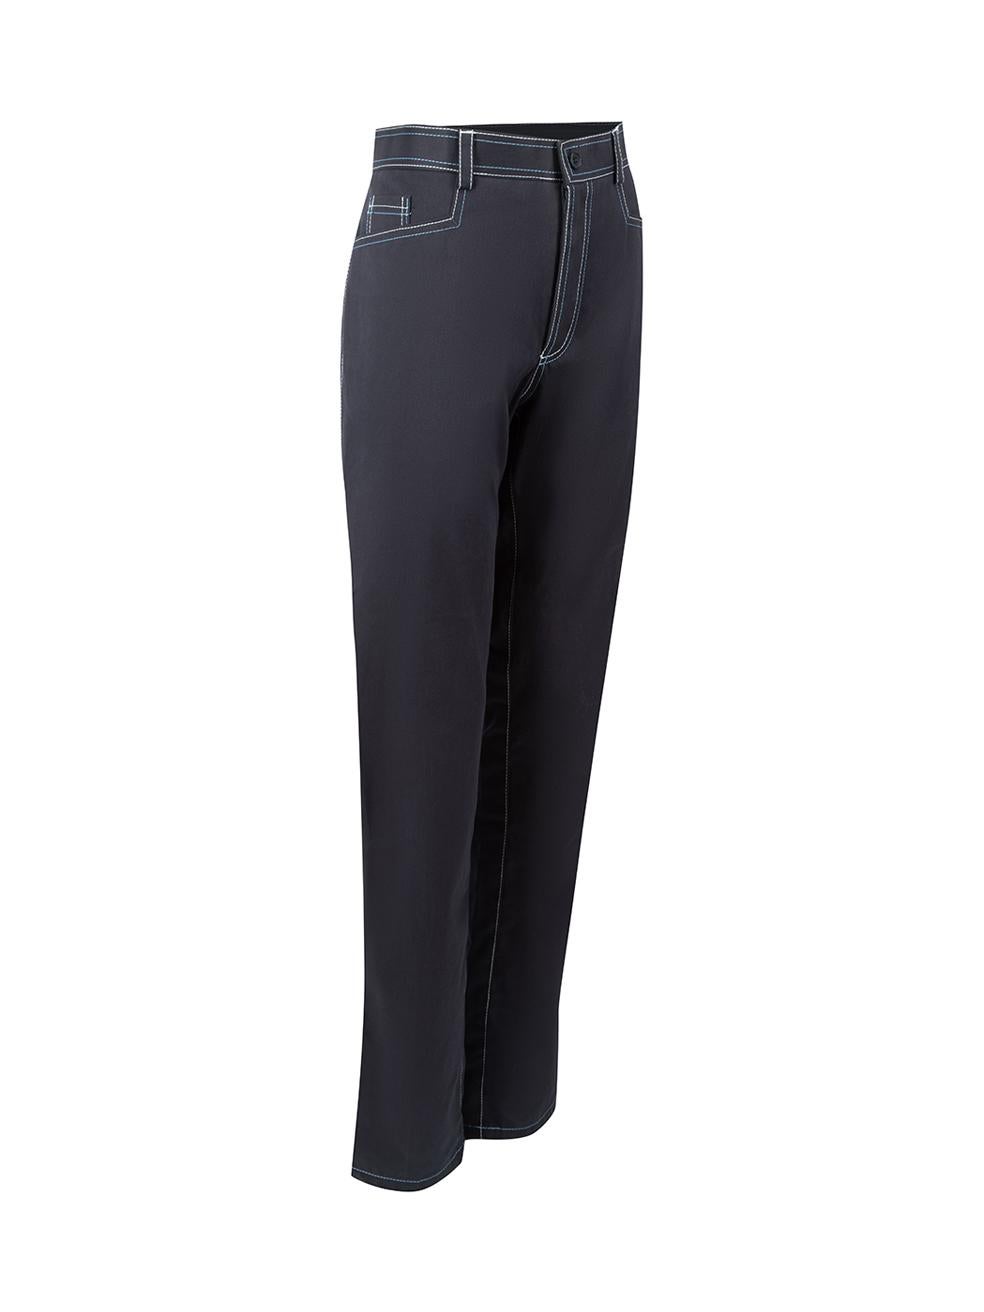 CONDITION is Very good. Hardly any visible wear to trousers is evident on this used Sanne designer sample item. Please note that this item does not have brand label.
 
 Details
  Designer sample item
 Navy
 Cotton
 Straight leg trousers
 High rise
